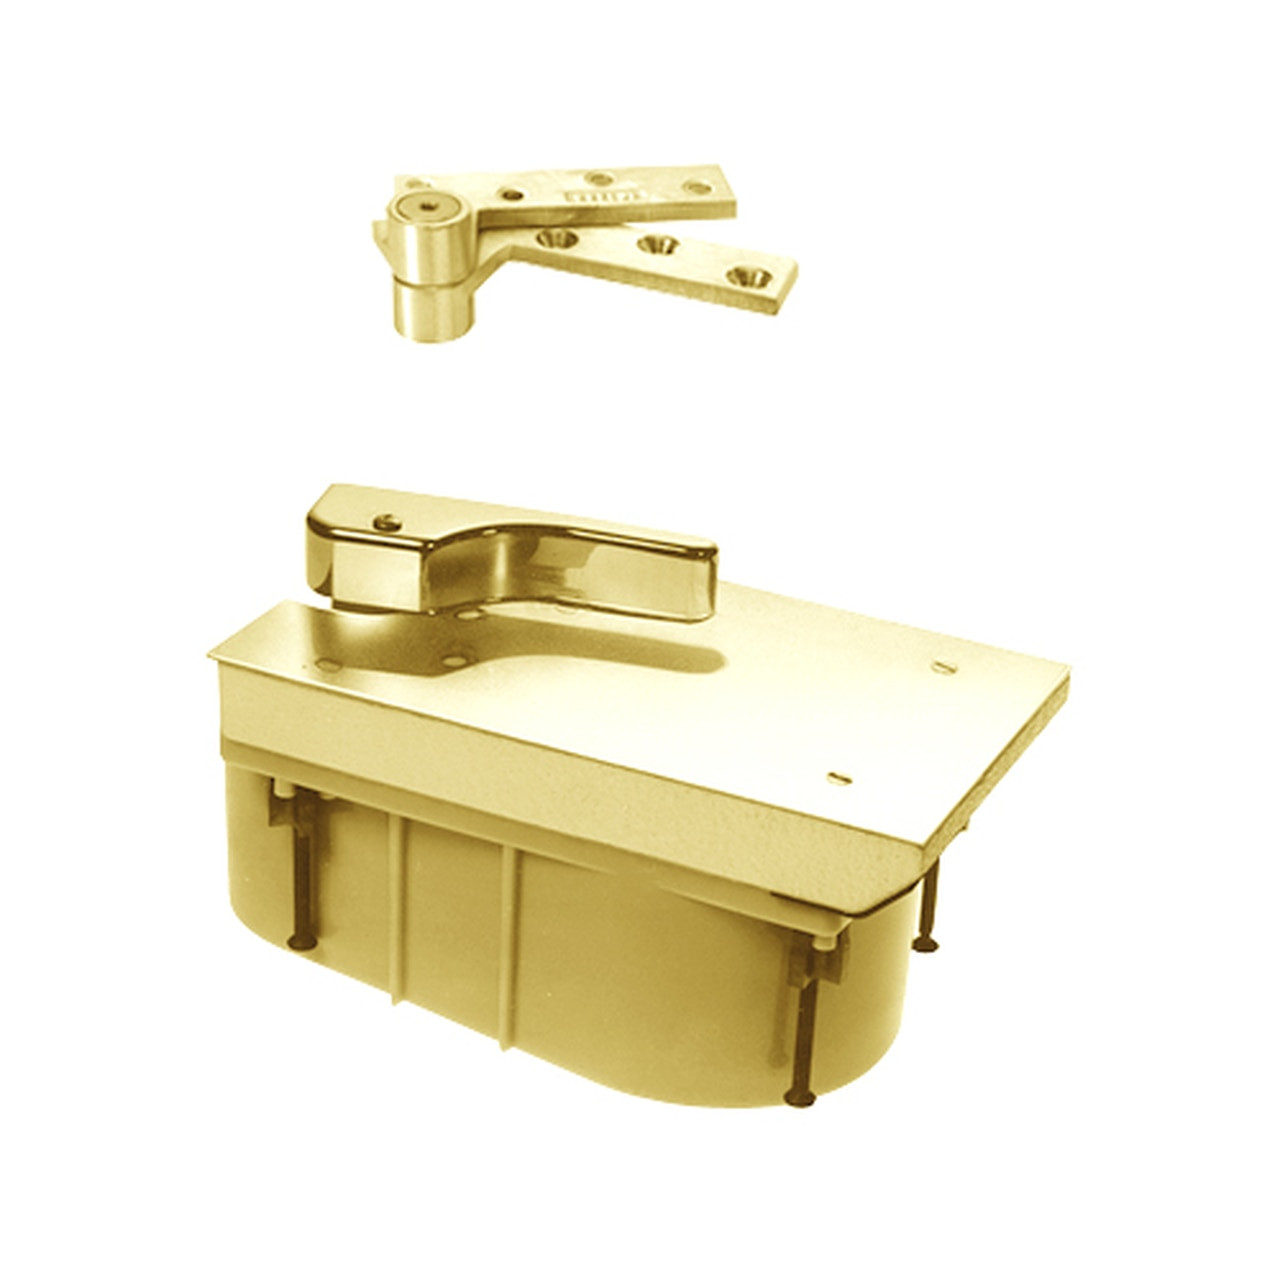 Q27-105S-LFP-LCC-LH-605 Rixson 27 Series Heavy Duty Quick Install Offset Hung Floor Closer in Bright Brass Finish